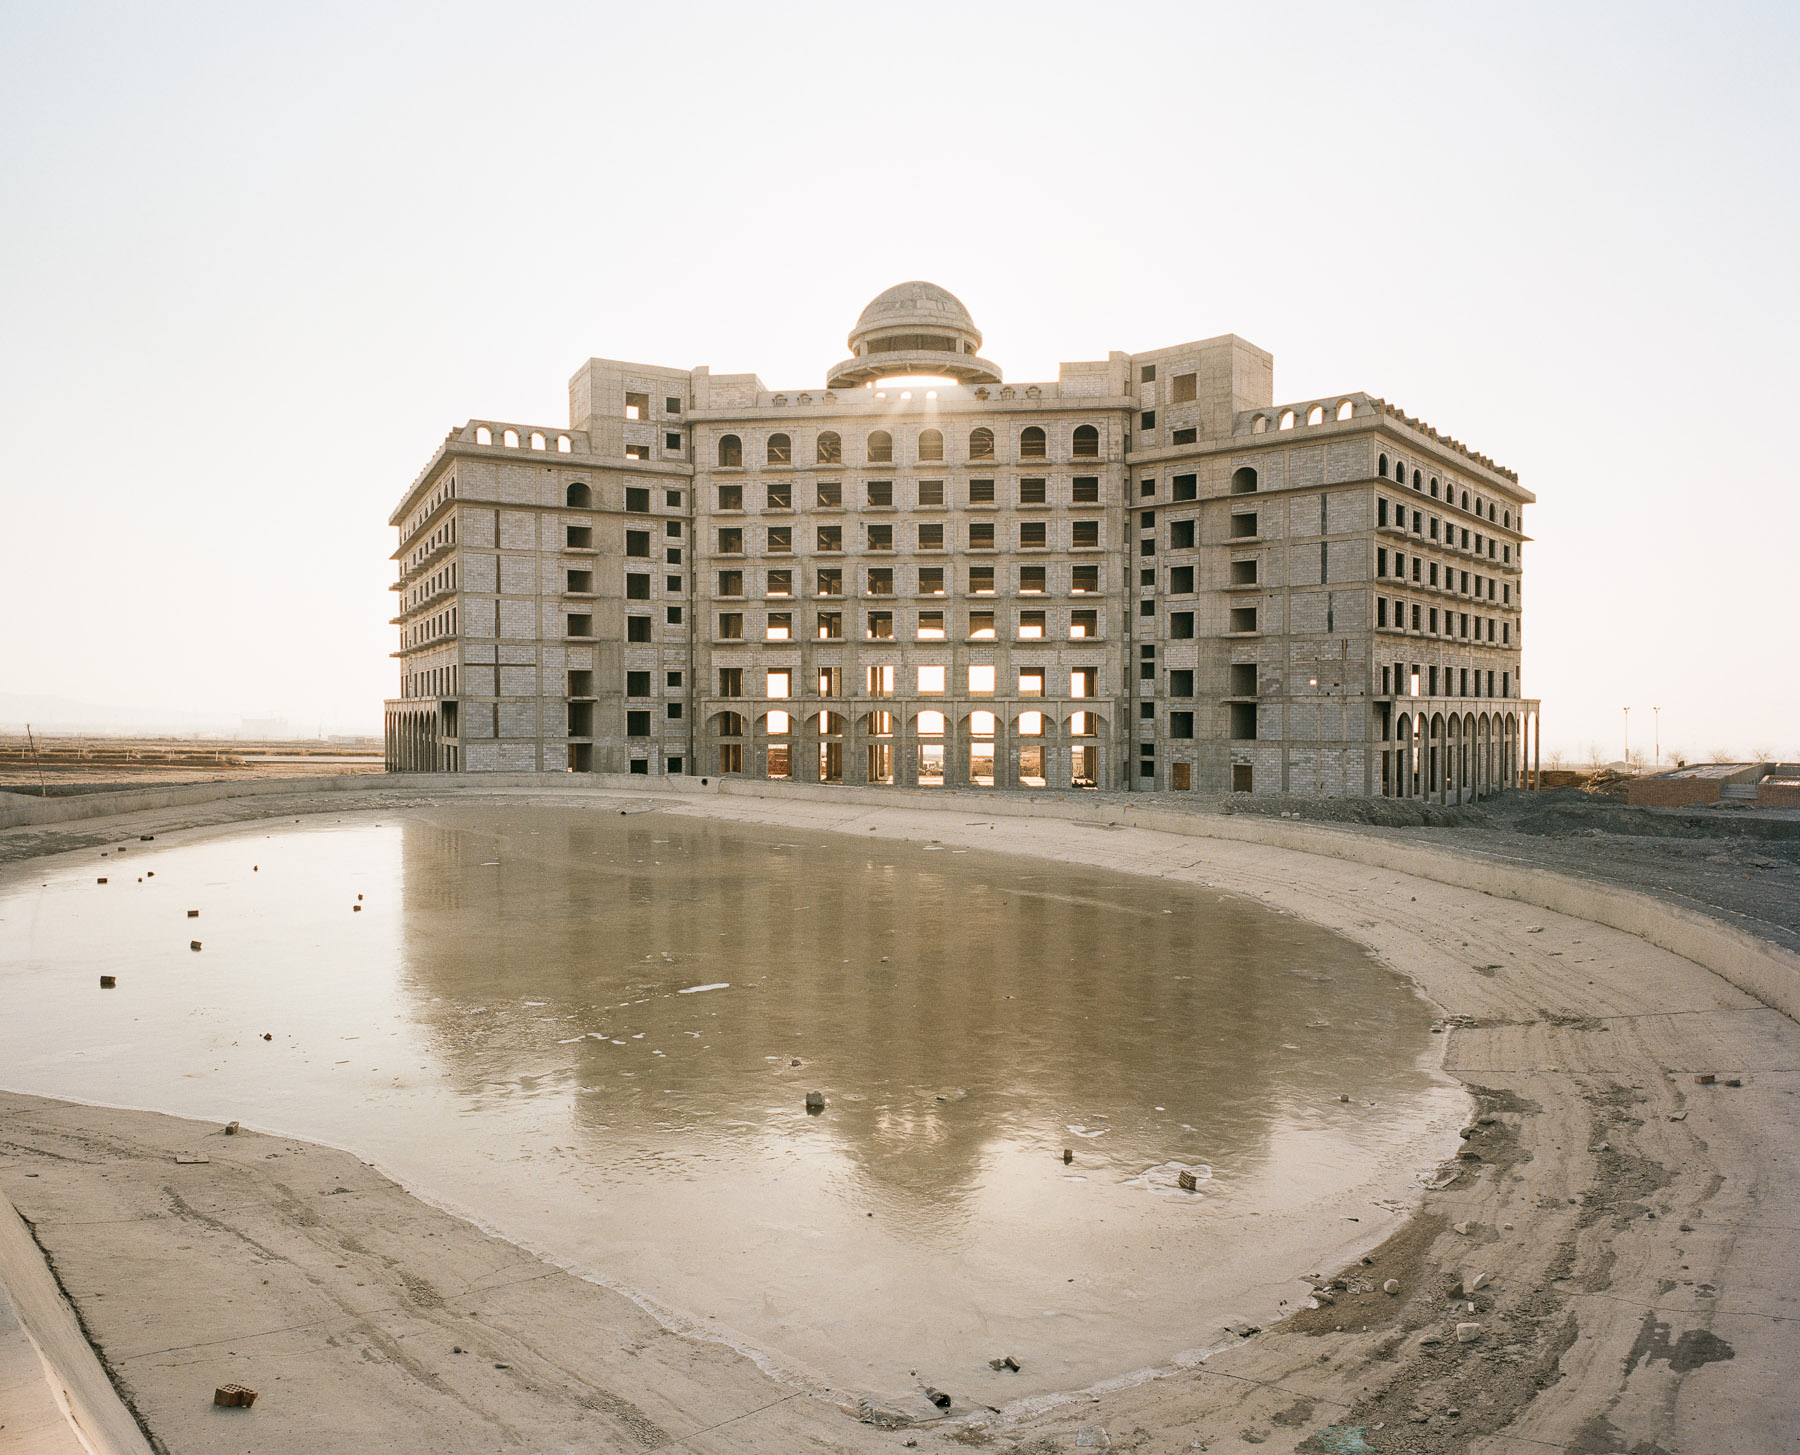  December 2016. Xinjiang province, China. Half constructed and decaying palace hotel in the new development zone of the city of Turpan in Xinjiang. 